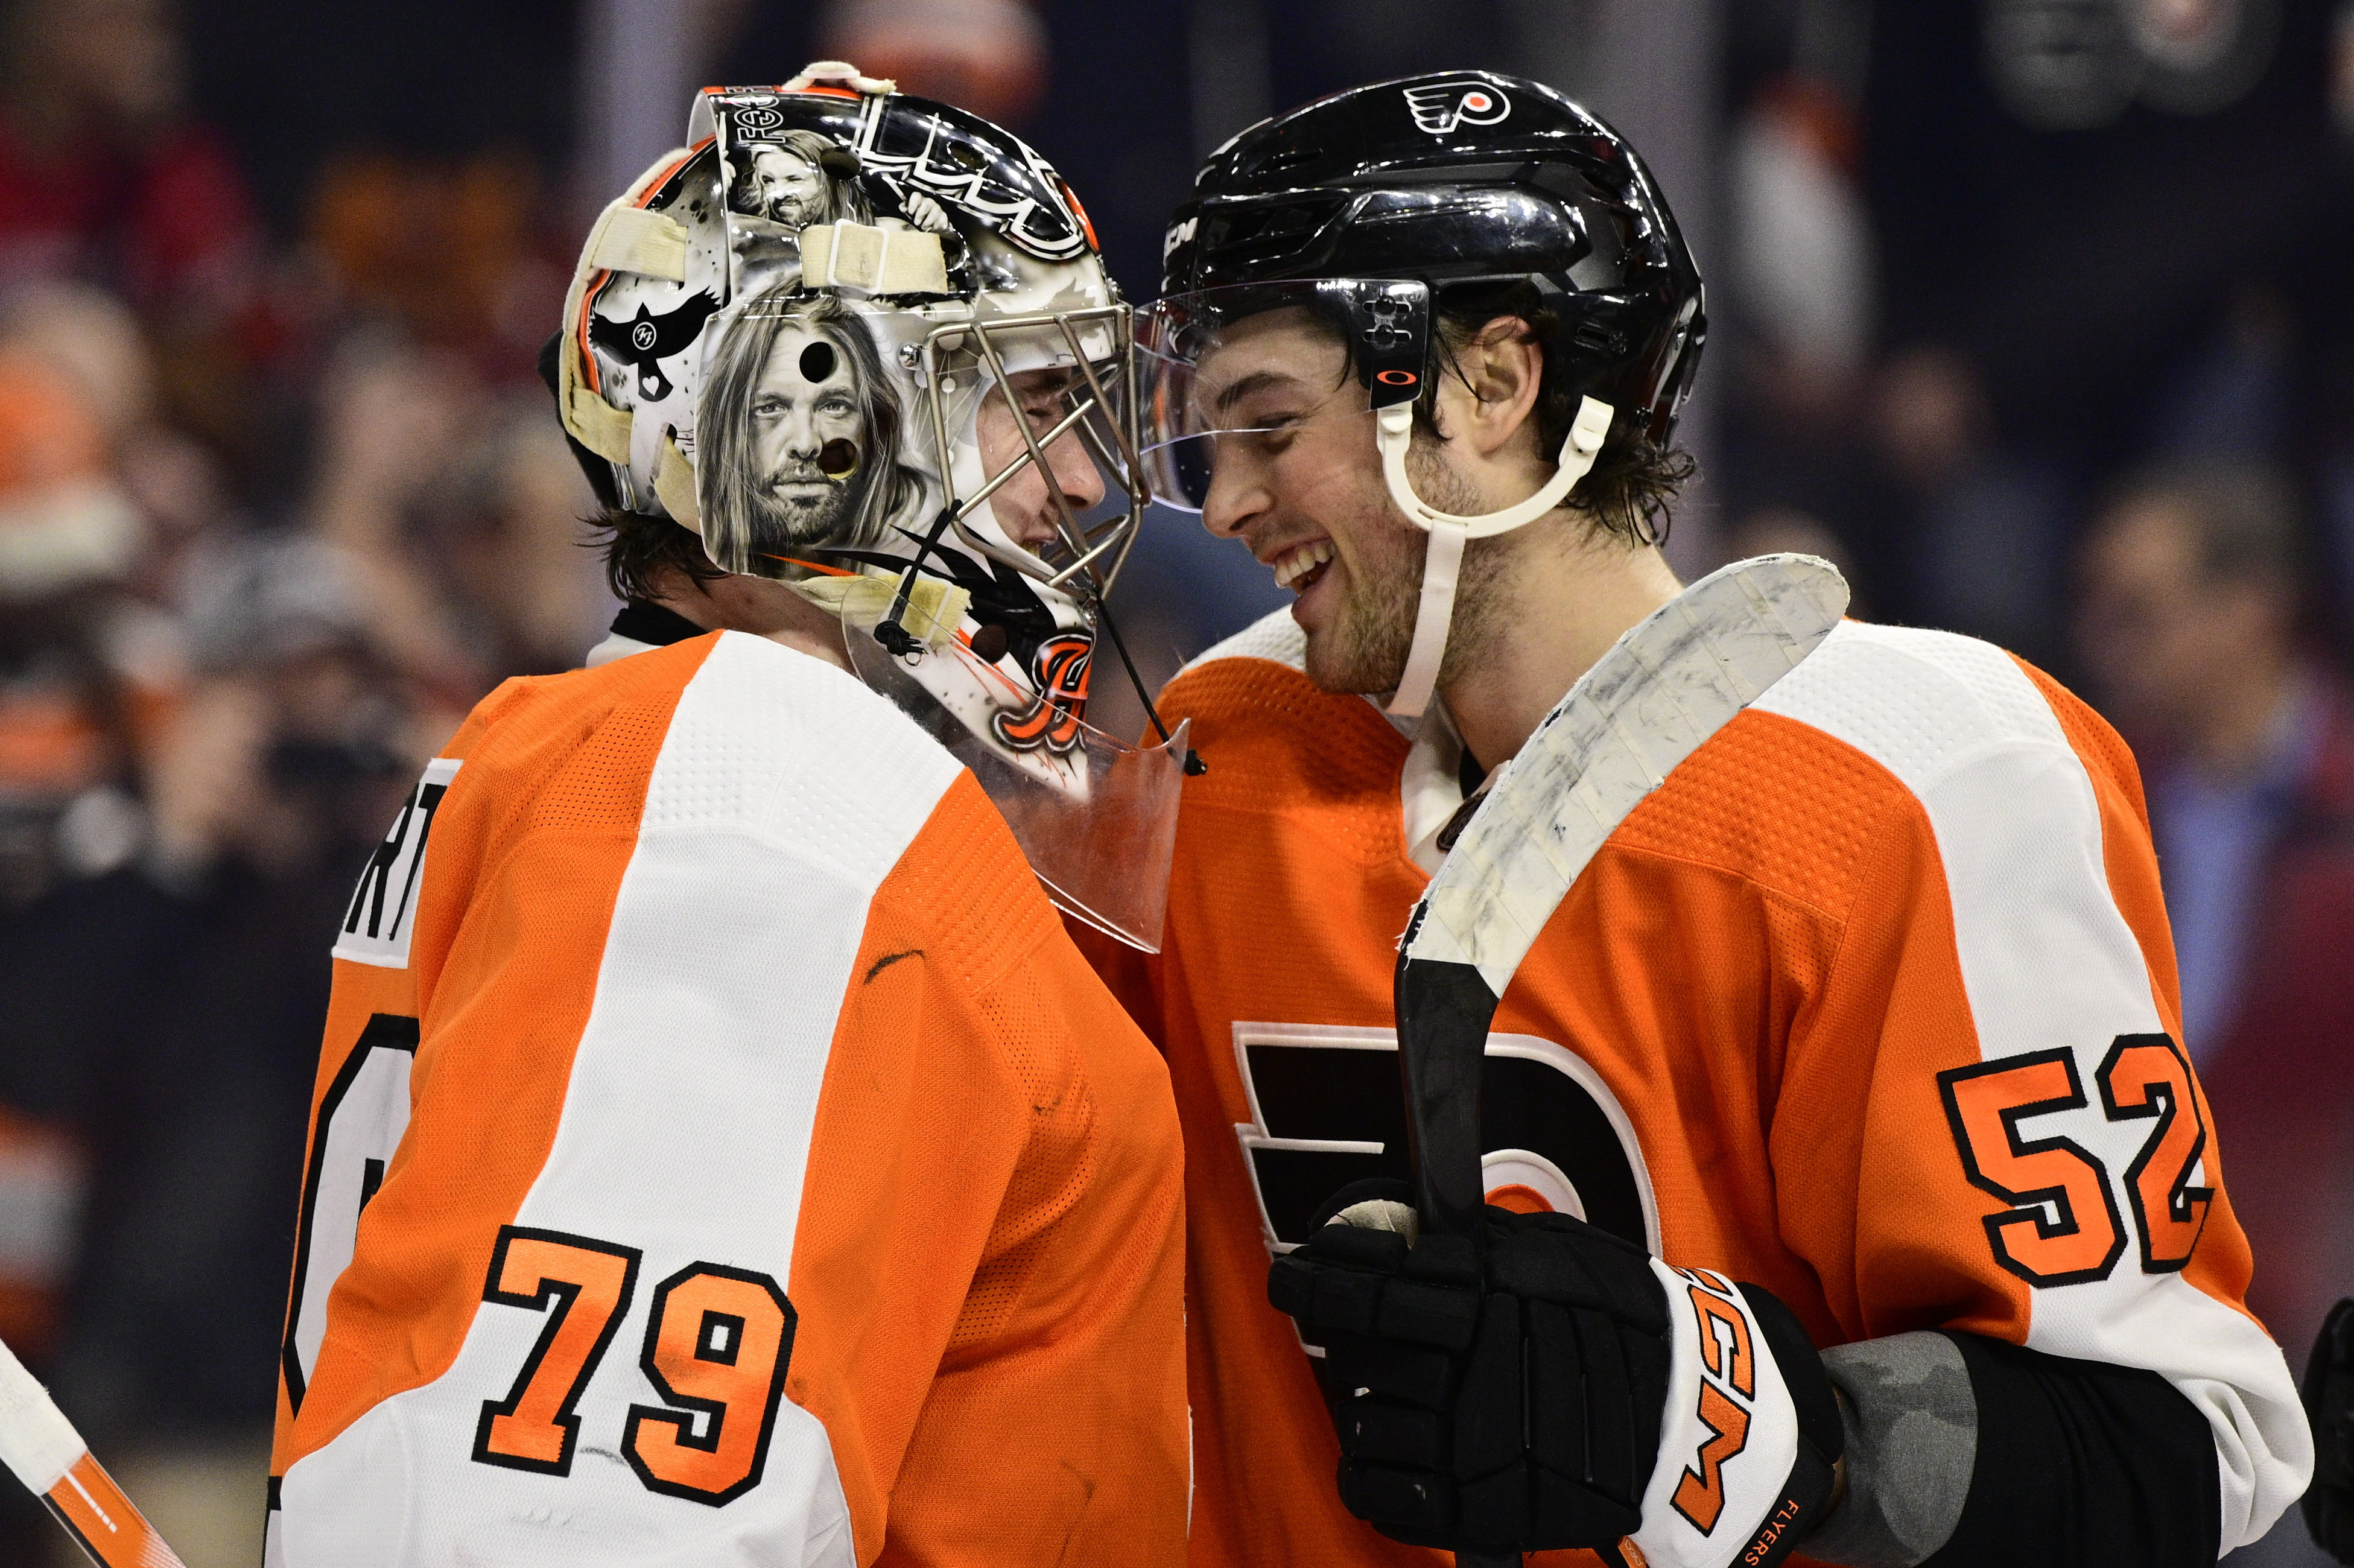 Prospects we like that are still available for the Flyers - Broad